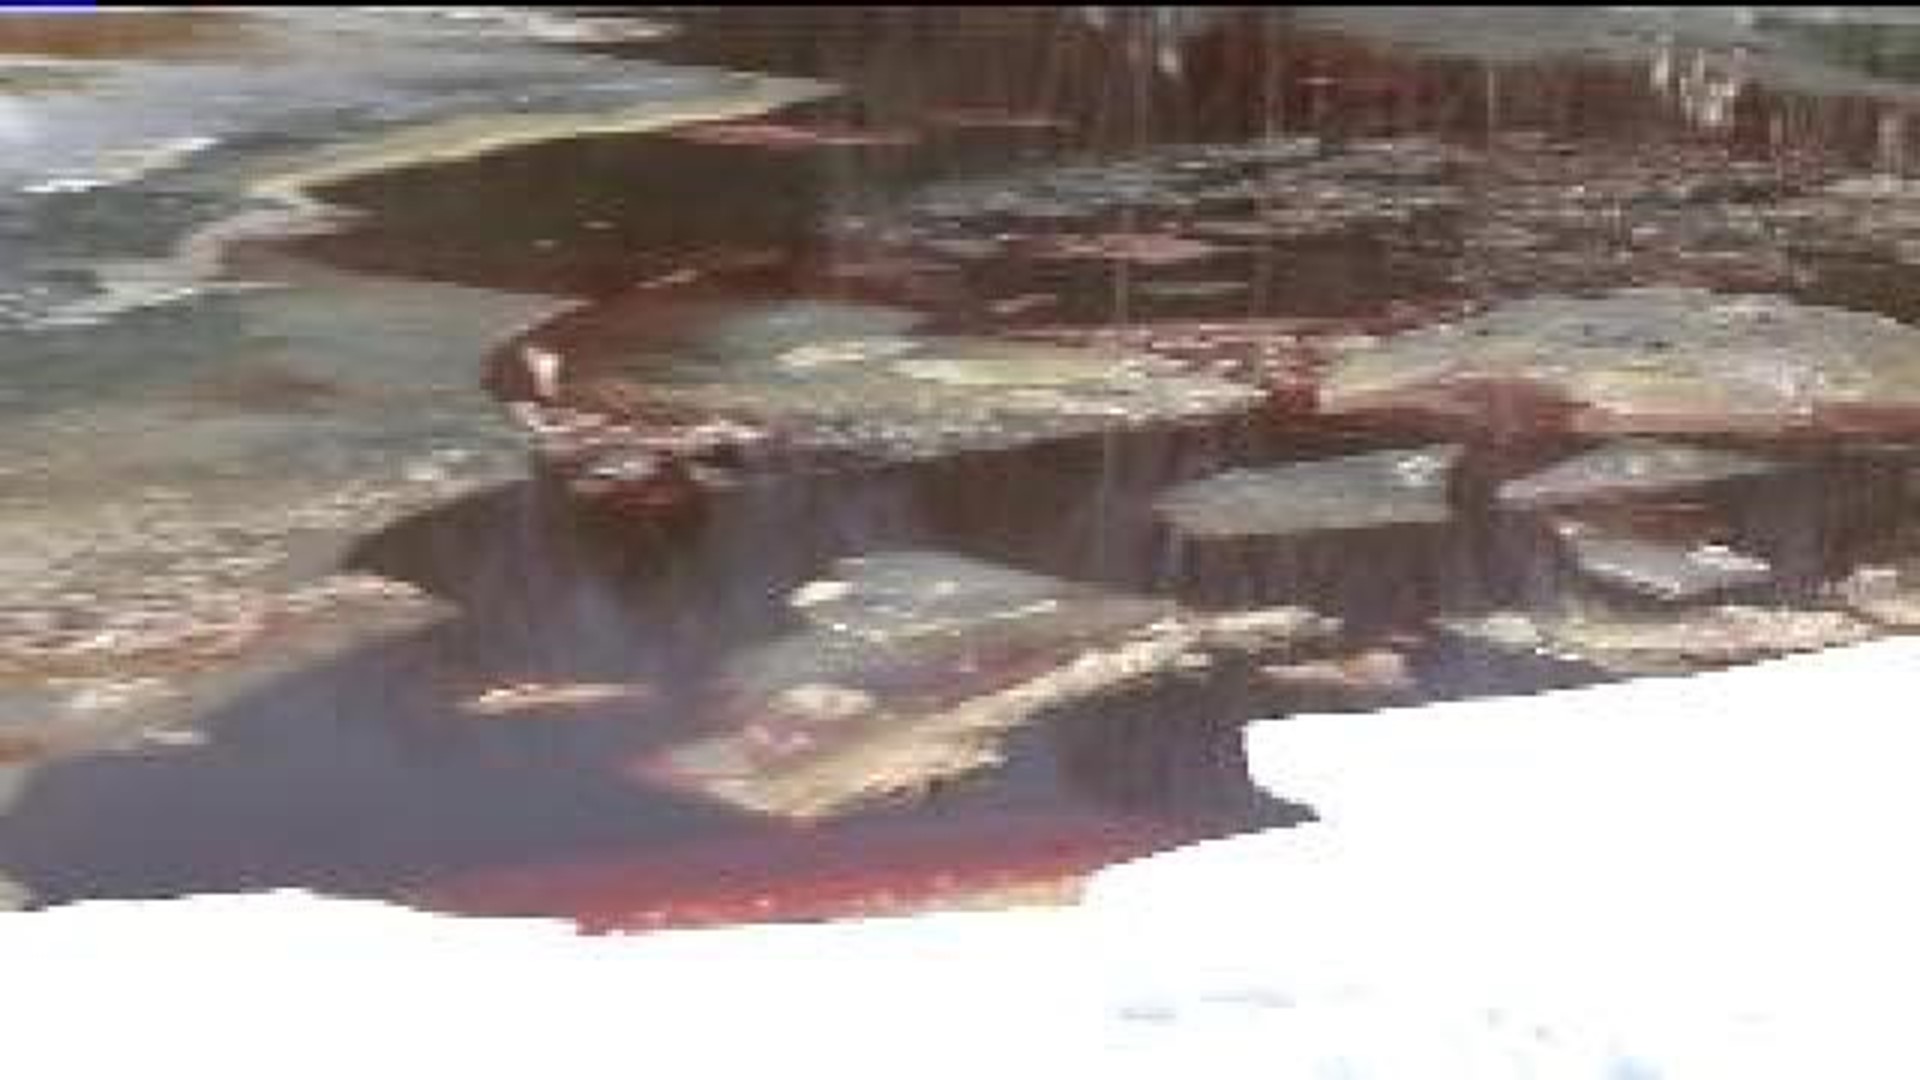 Investigation into Oil Spill at Lake Continues